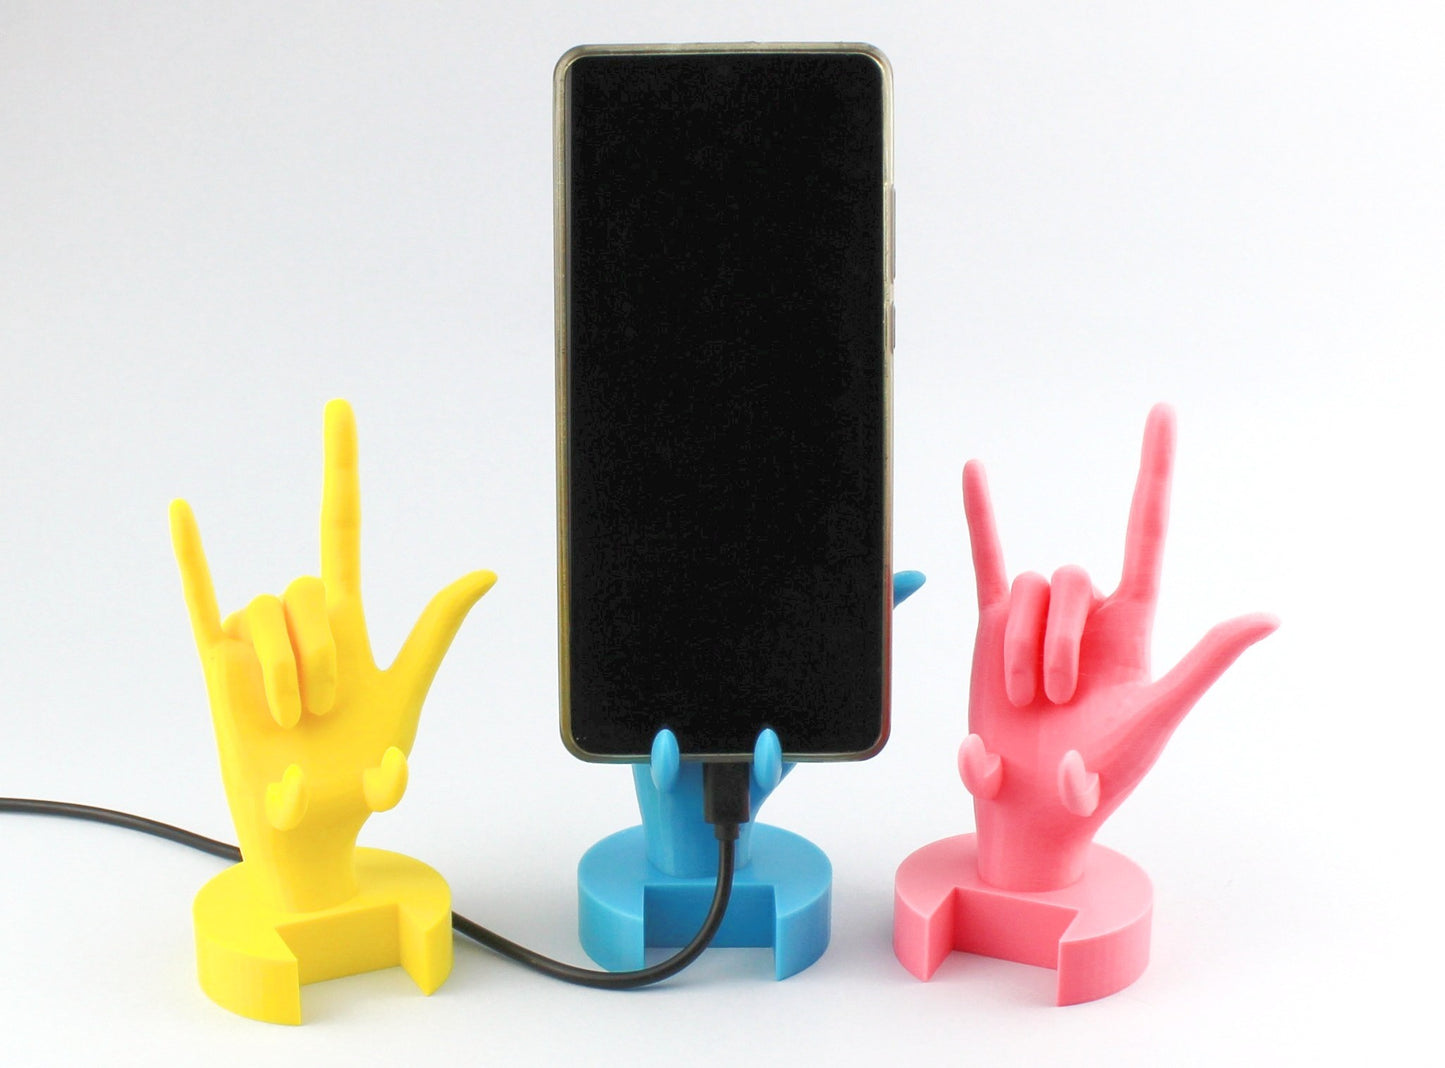 A Yellow, Pink and Light blue 3D Printed I Love You Sign Language Phone Holders and a phone